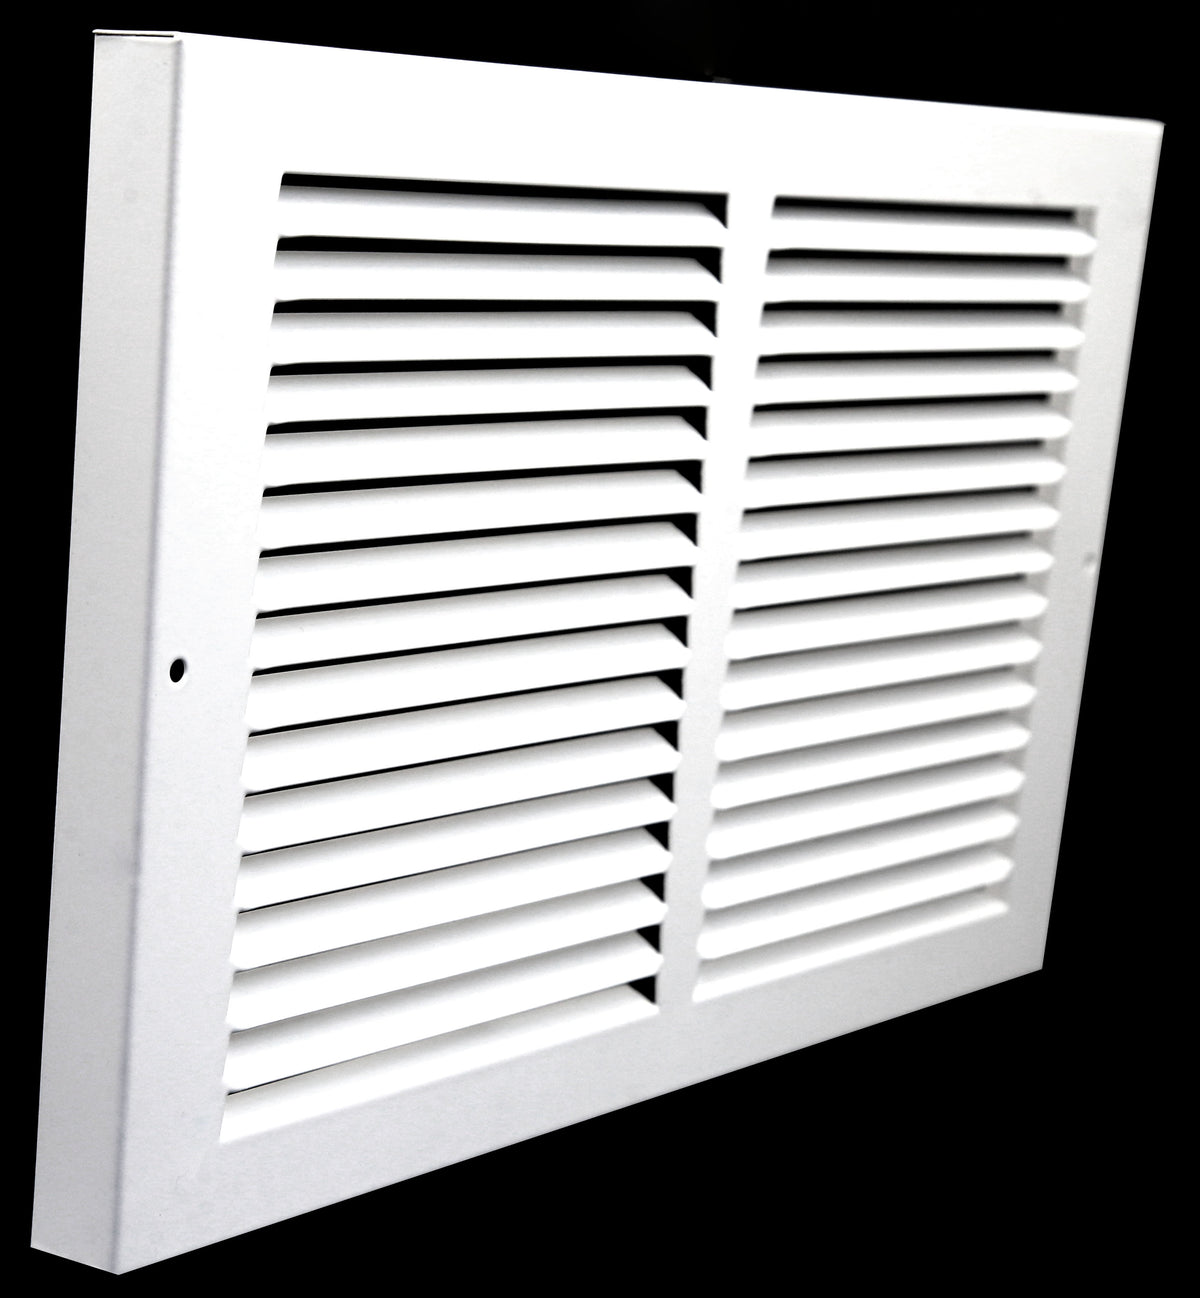 14&quot; X 8&quot; Baseboard Return Air Grille - HVAC Vent Duct Cover - 7/8&quot; Margin Turnback For Flush Fit With Baseboard Work - White